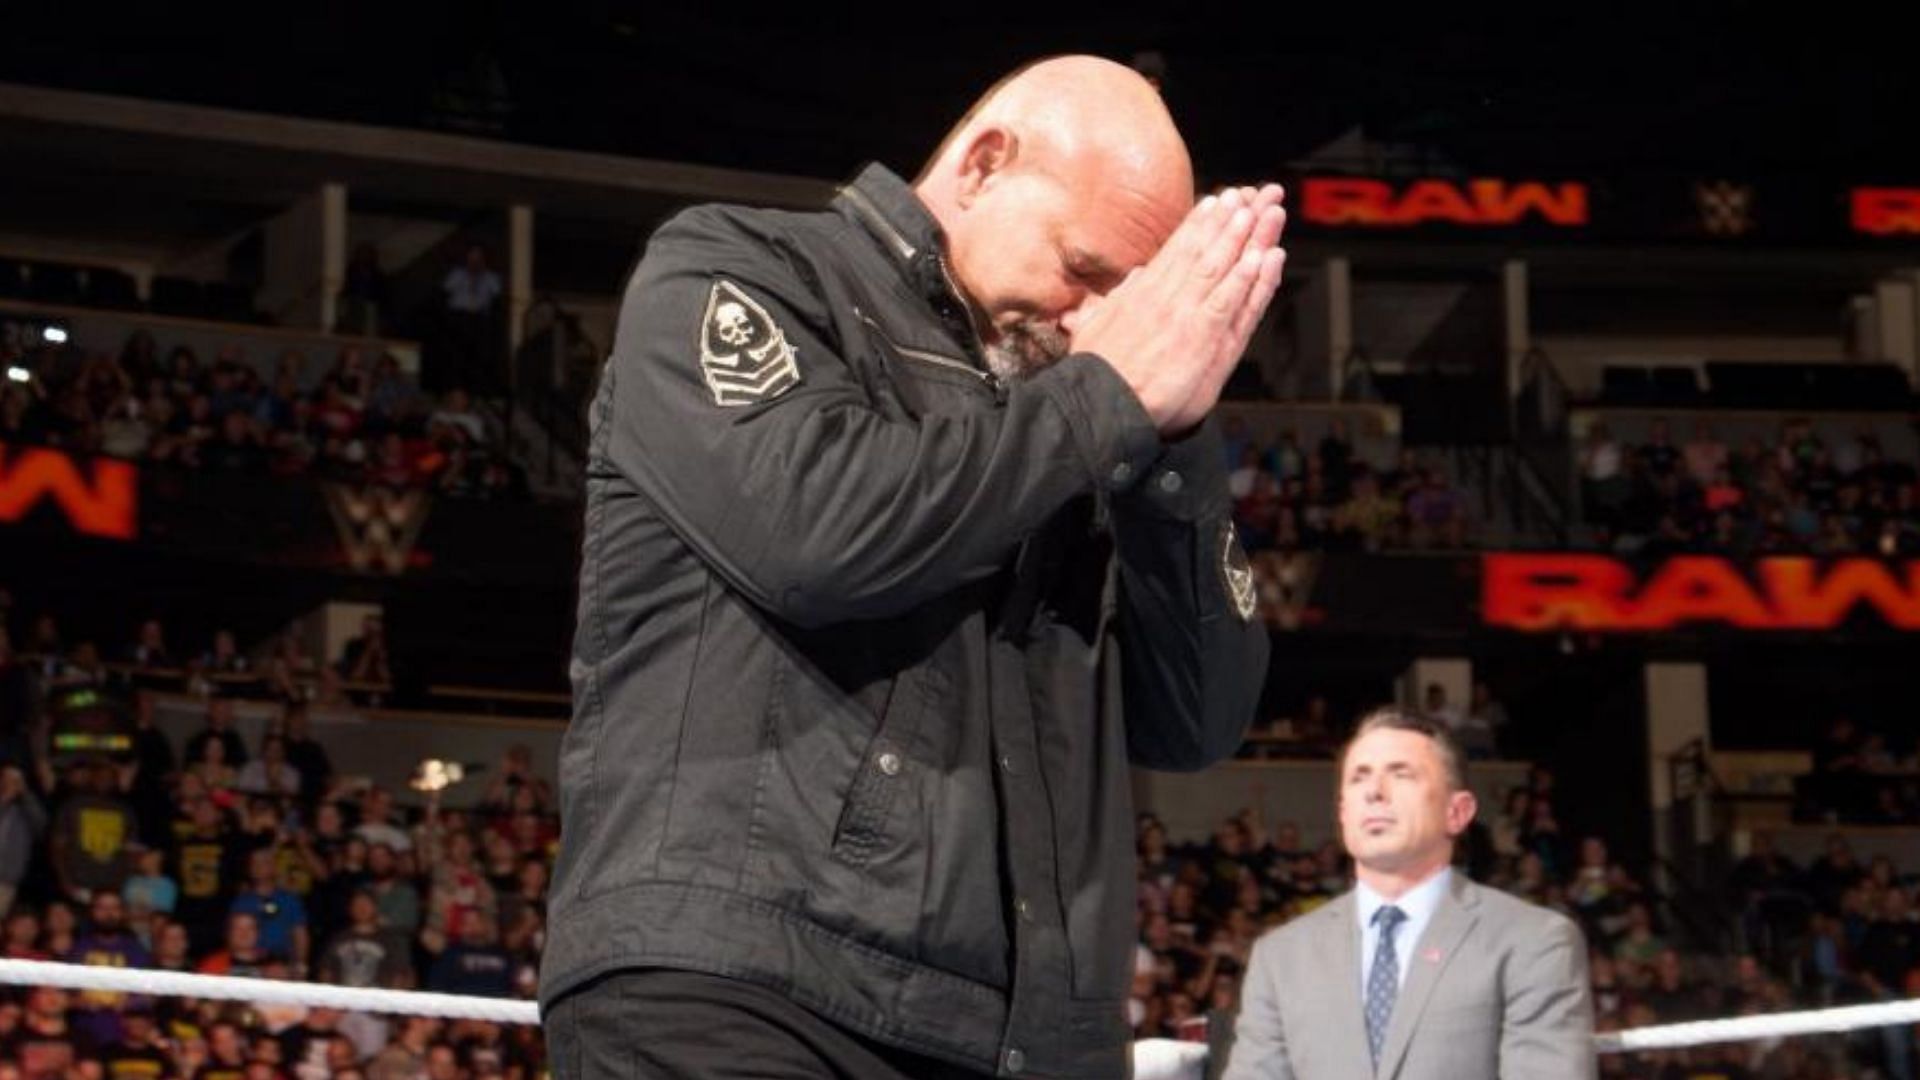 Goldberg returned to WWE in 2016 after a 12-year absence